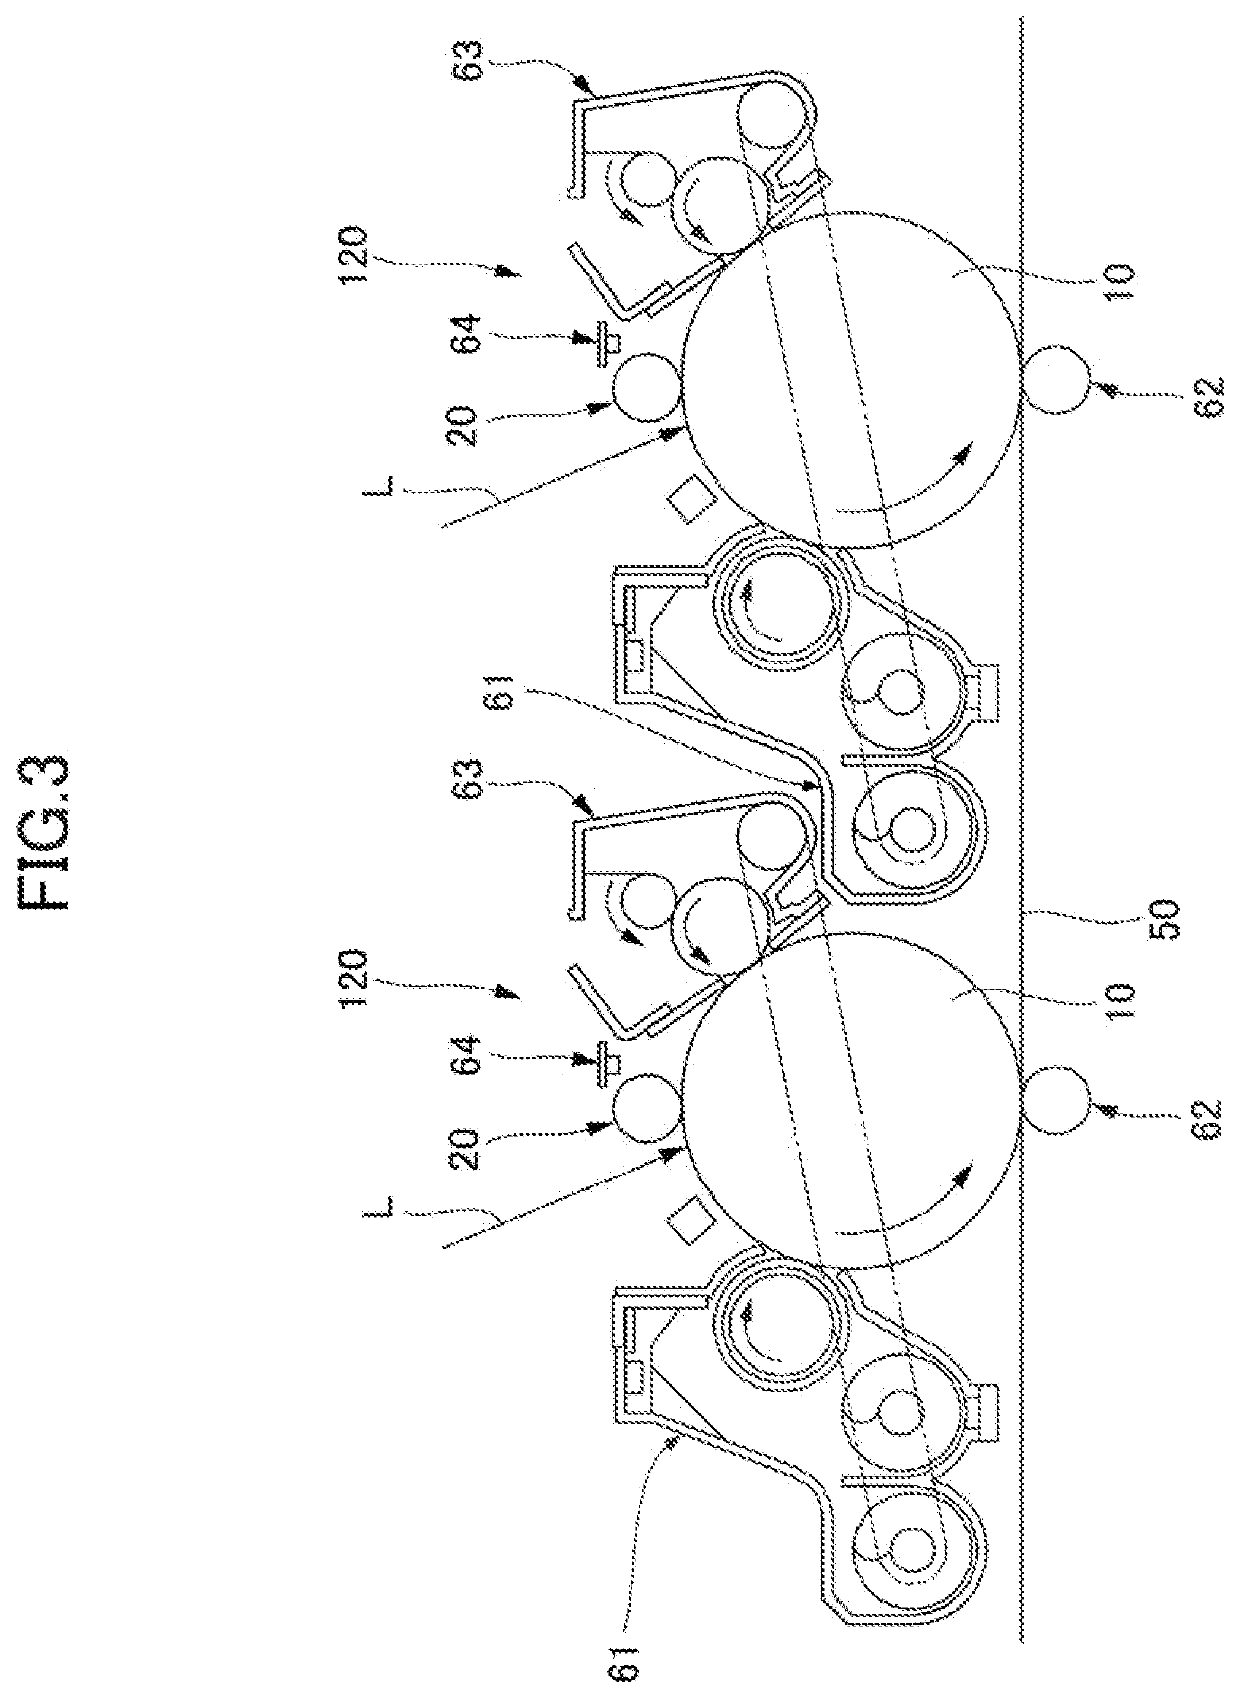 Toner, developing agent, toner housing unit, image forming apparatus, and a method of forming images